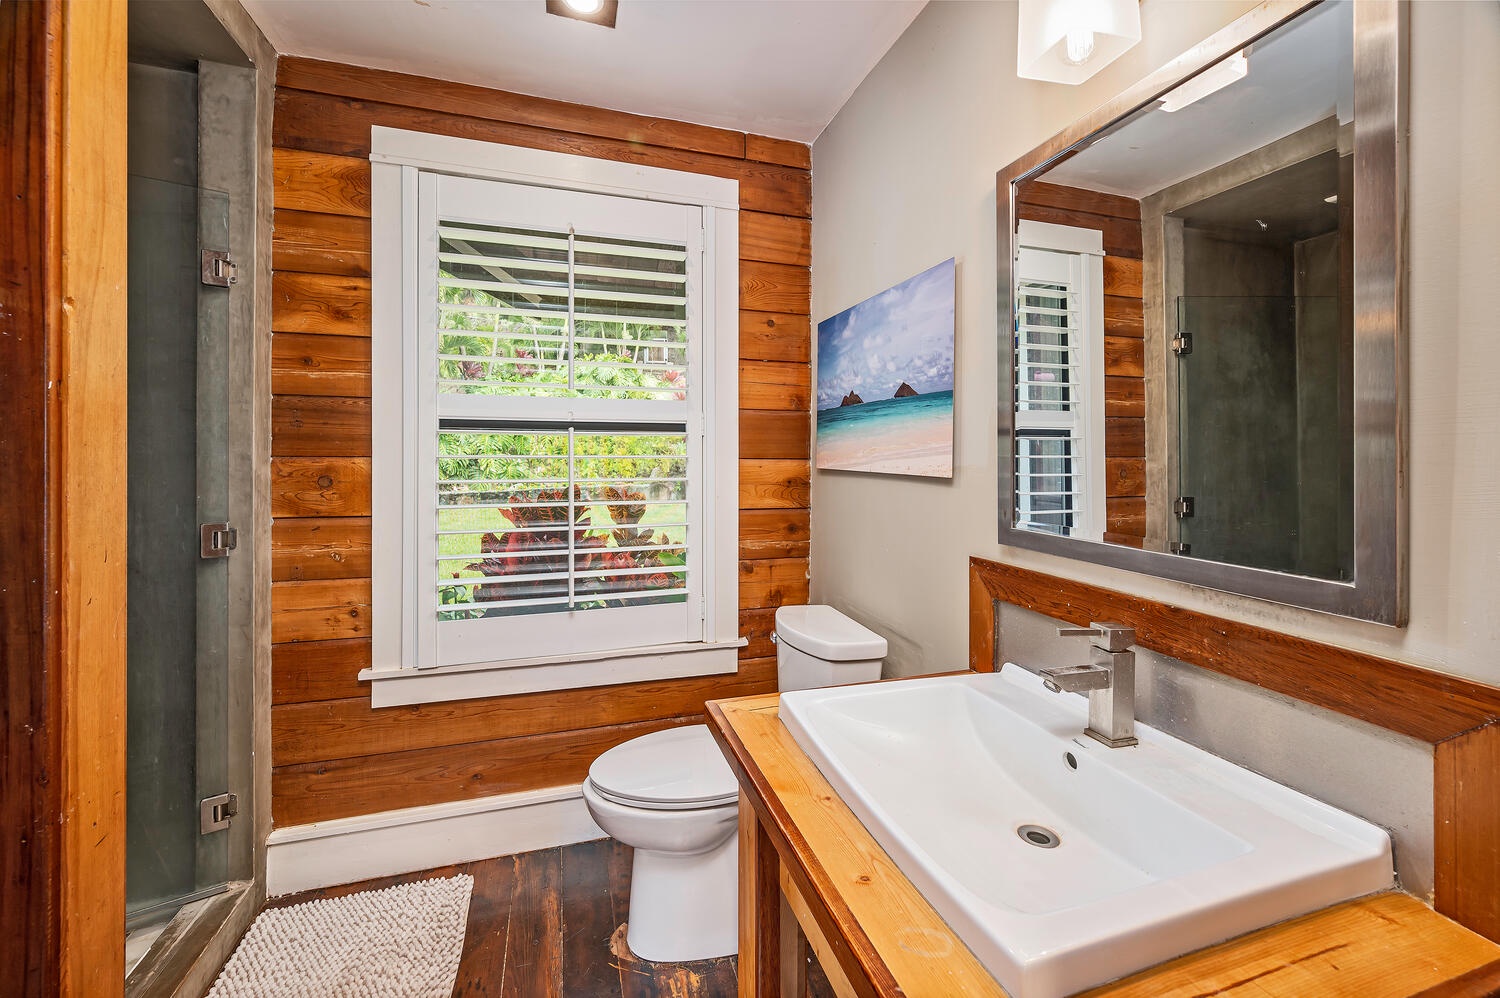 Haleiwa Vacation Rentals, Mele Makana - First guest full bathroom downstairs